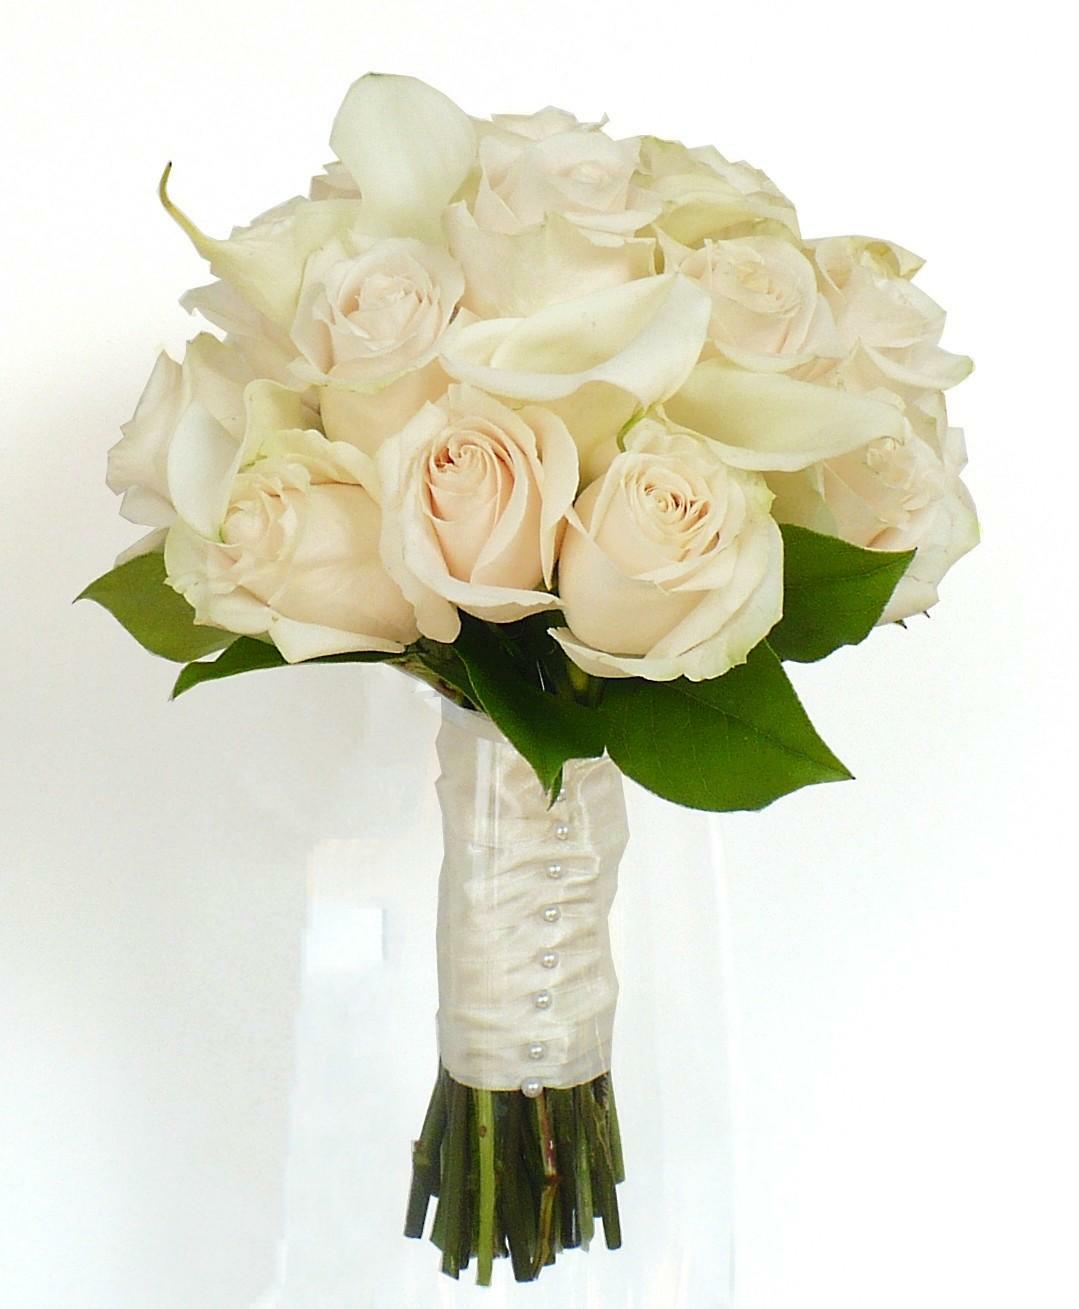 Caring For A White Rose Bouquet Image